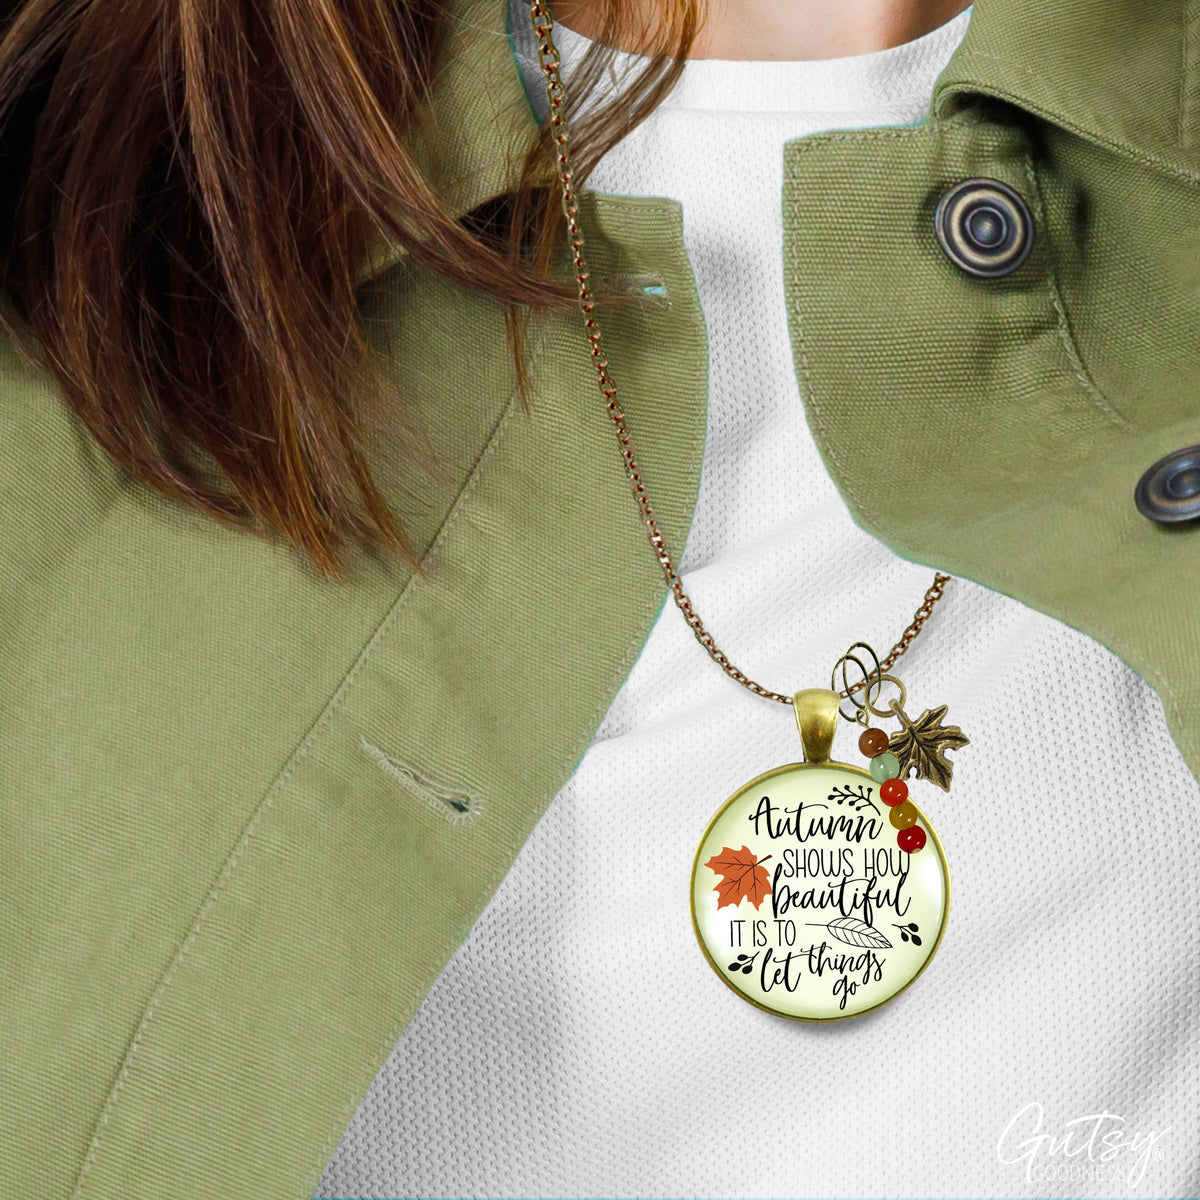 Autumn Shows Us How Beautiful It Is Necklace October Fall Season Theme Quote Jewelry Leaves Charm  Necklace - Gutsy Goodness Handmade Jewelry